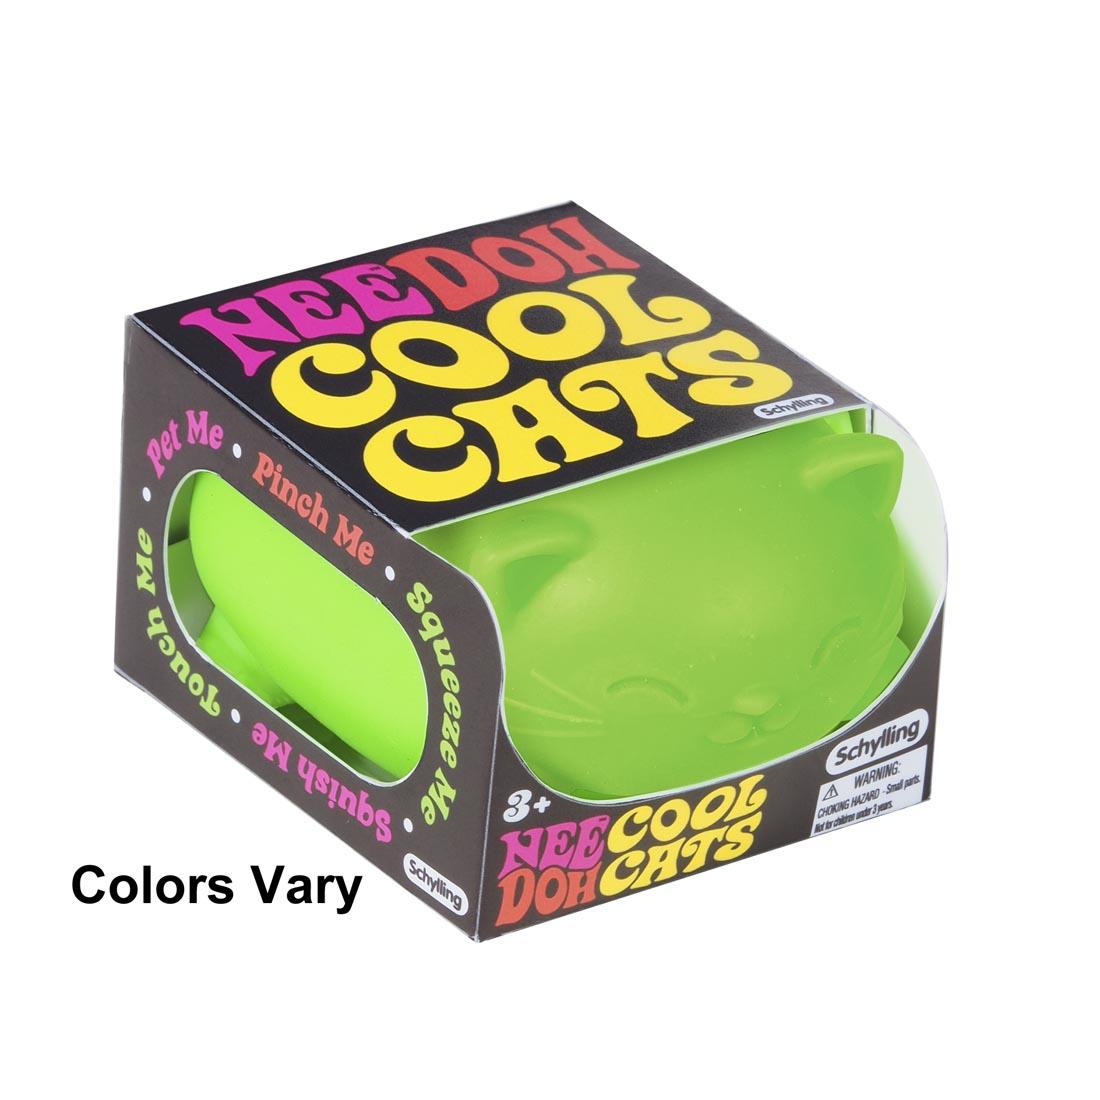 Nee Doh Cool Cat with the text Colors Vary